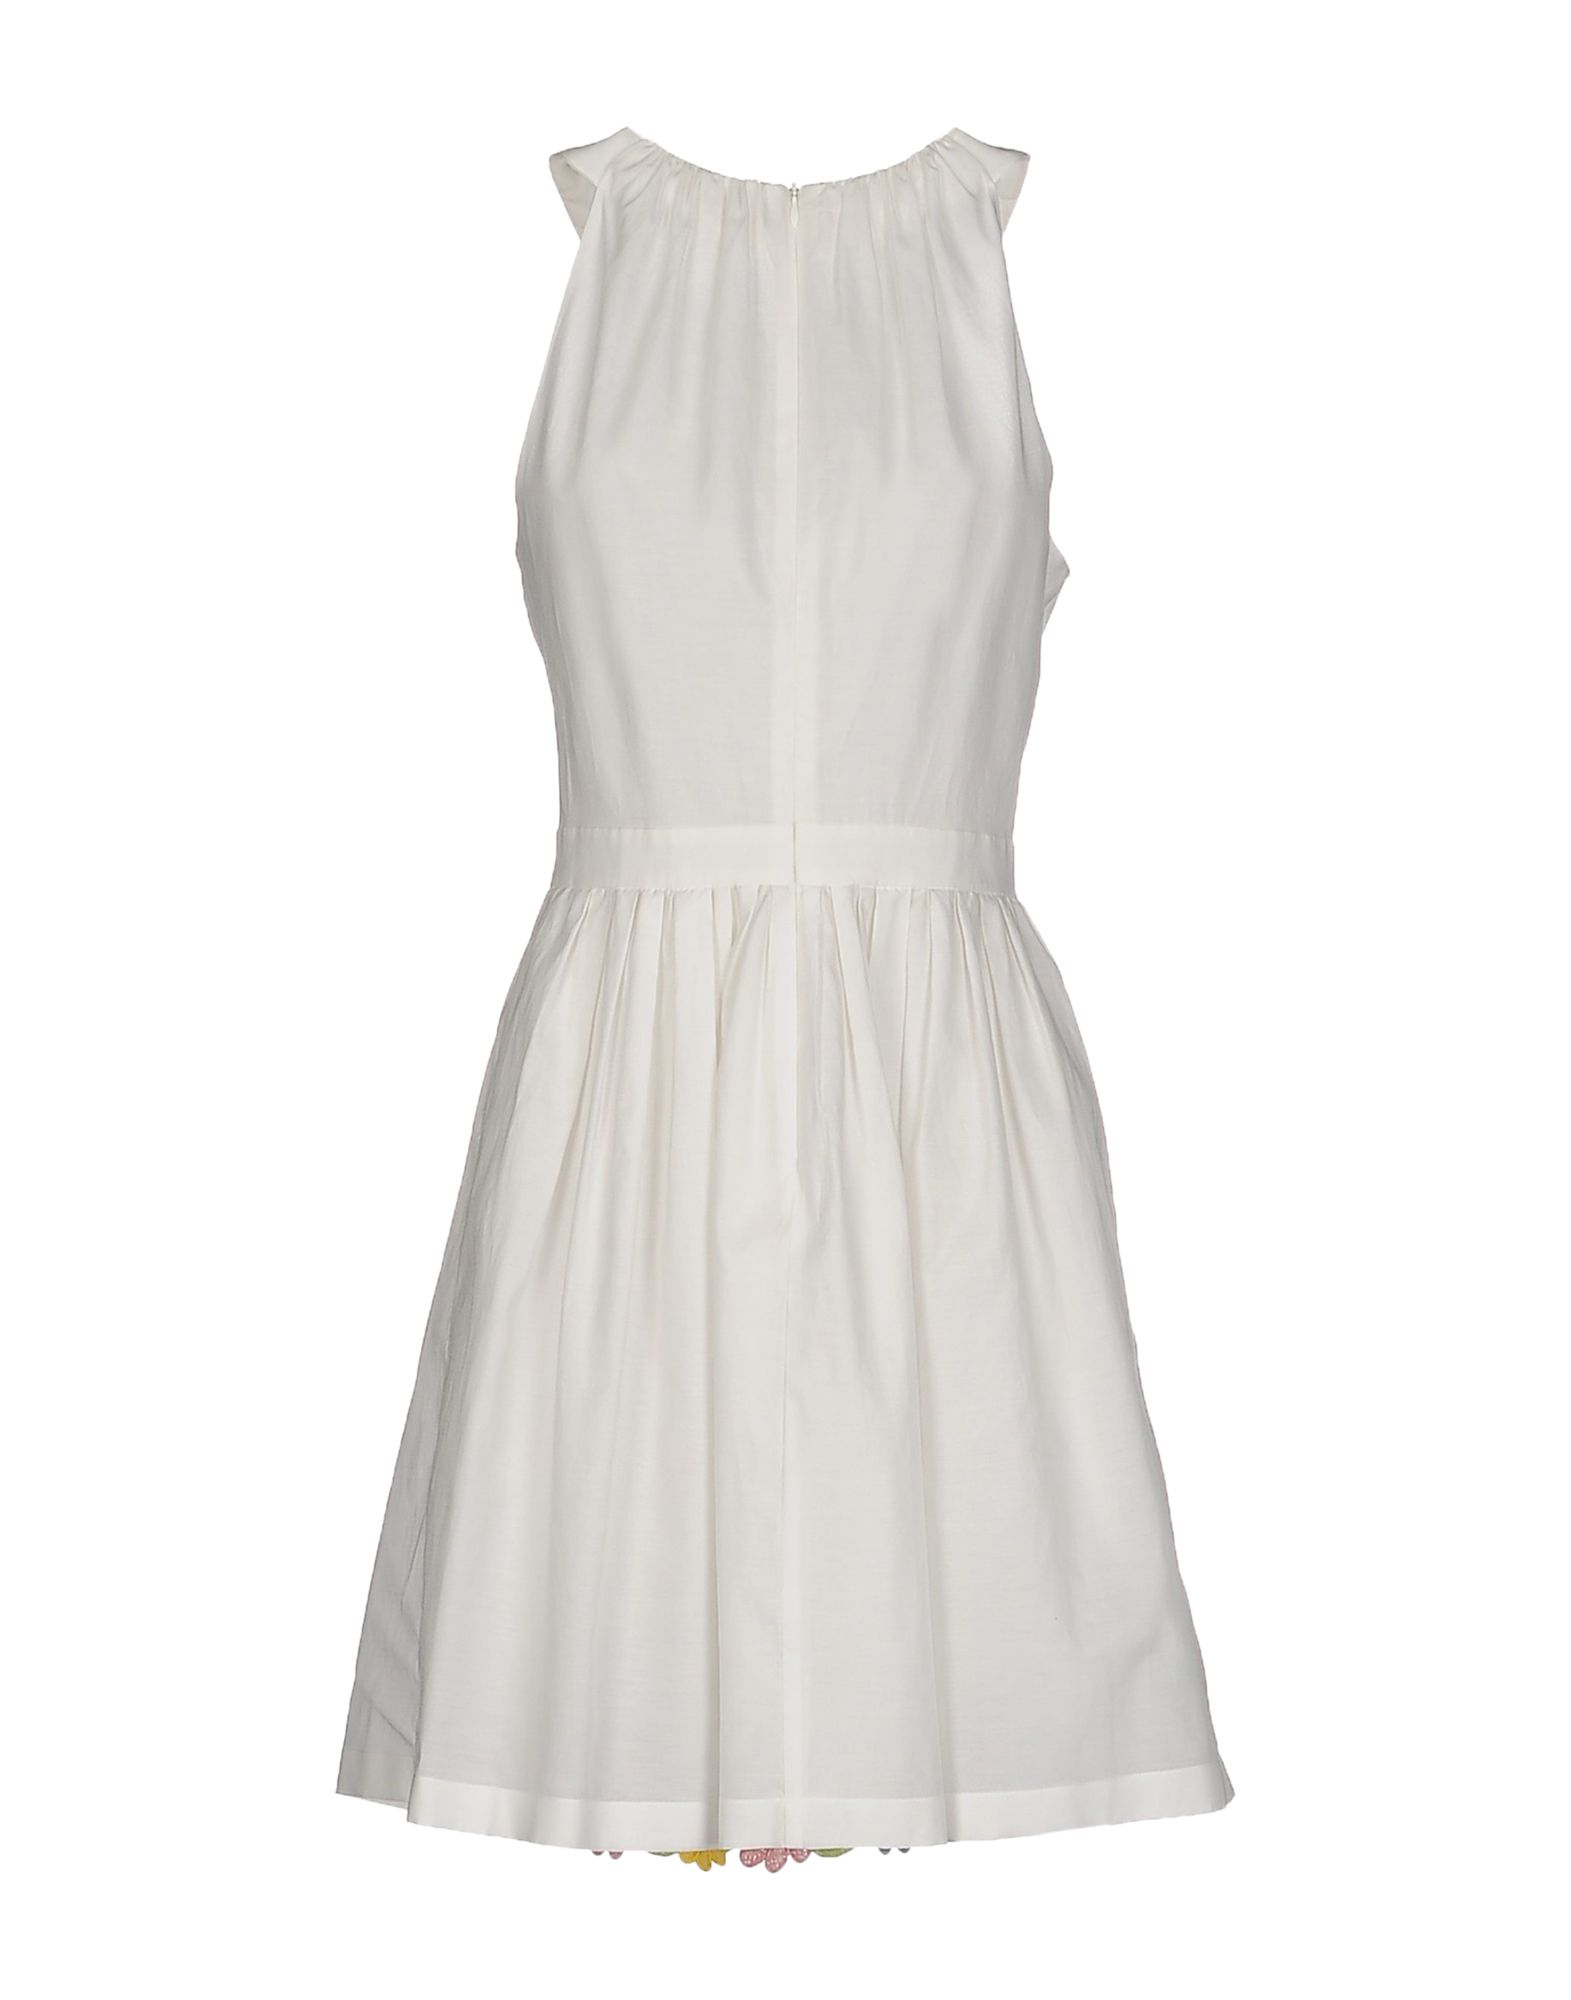 Boutique Moschino Cotton Short Dress in White - Lyst